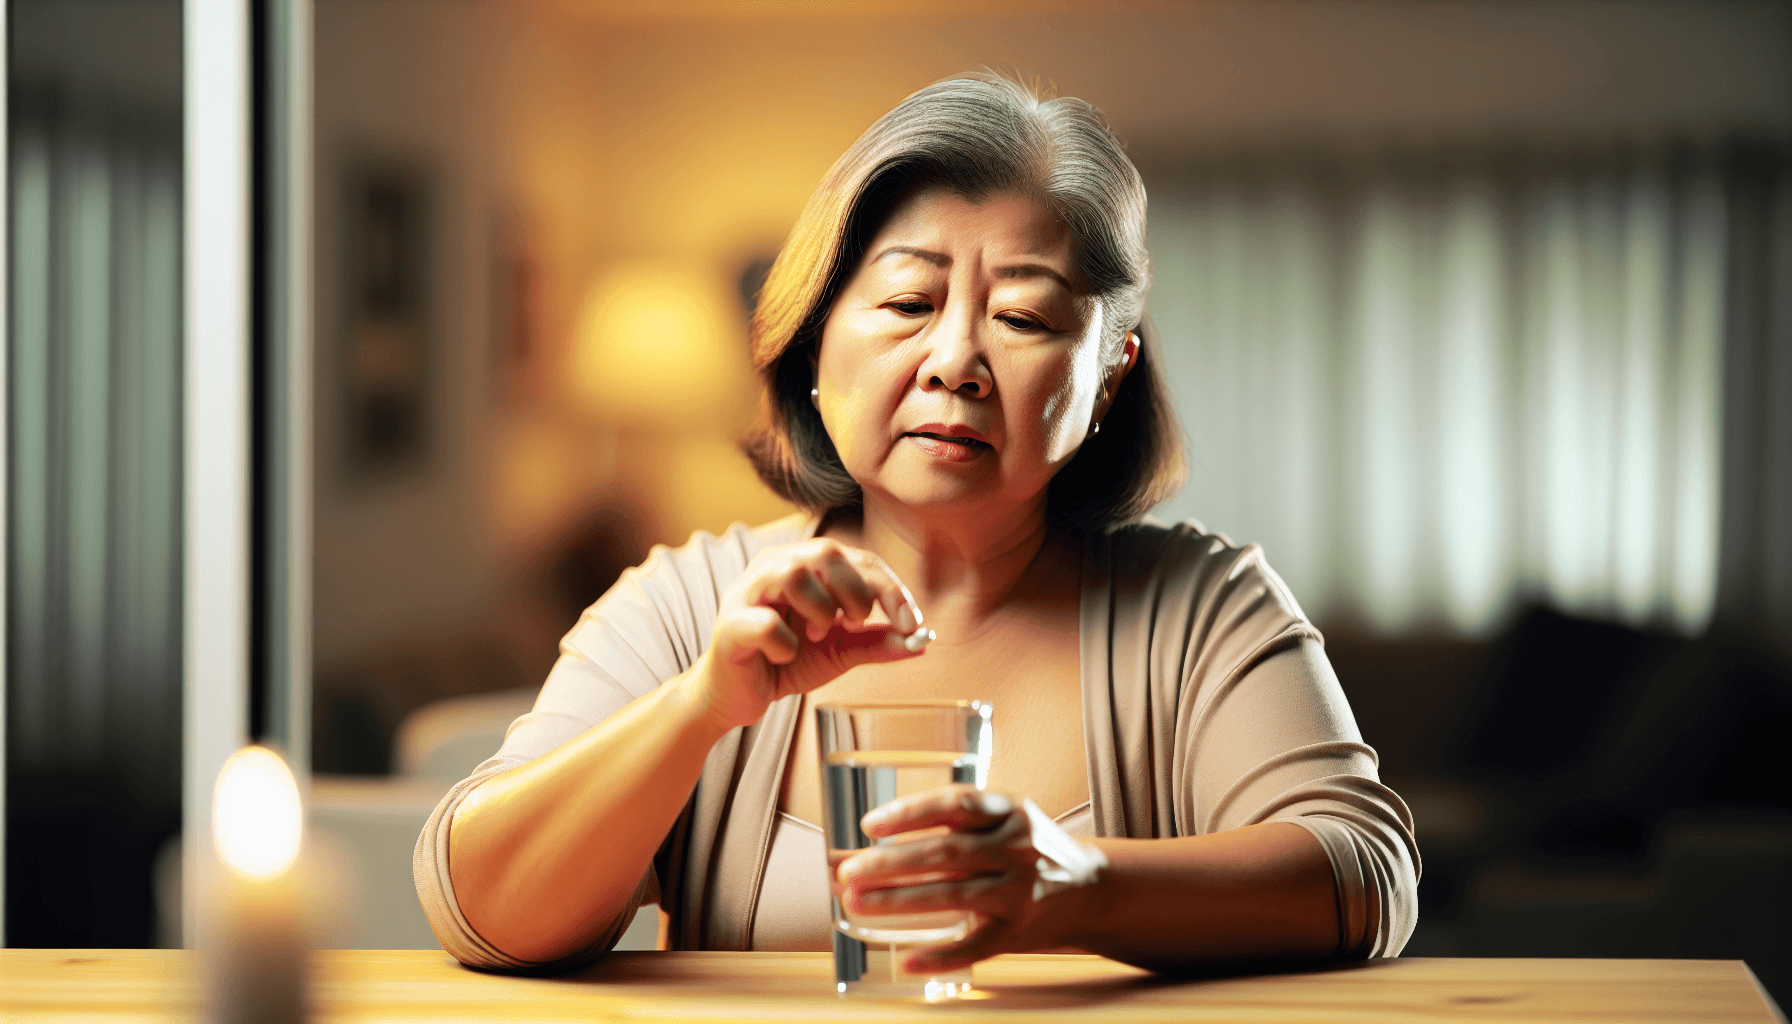 Photo of person taking medication symbolizing treatment for atrial fibrillation